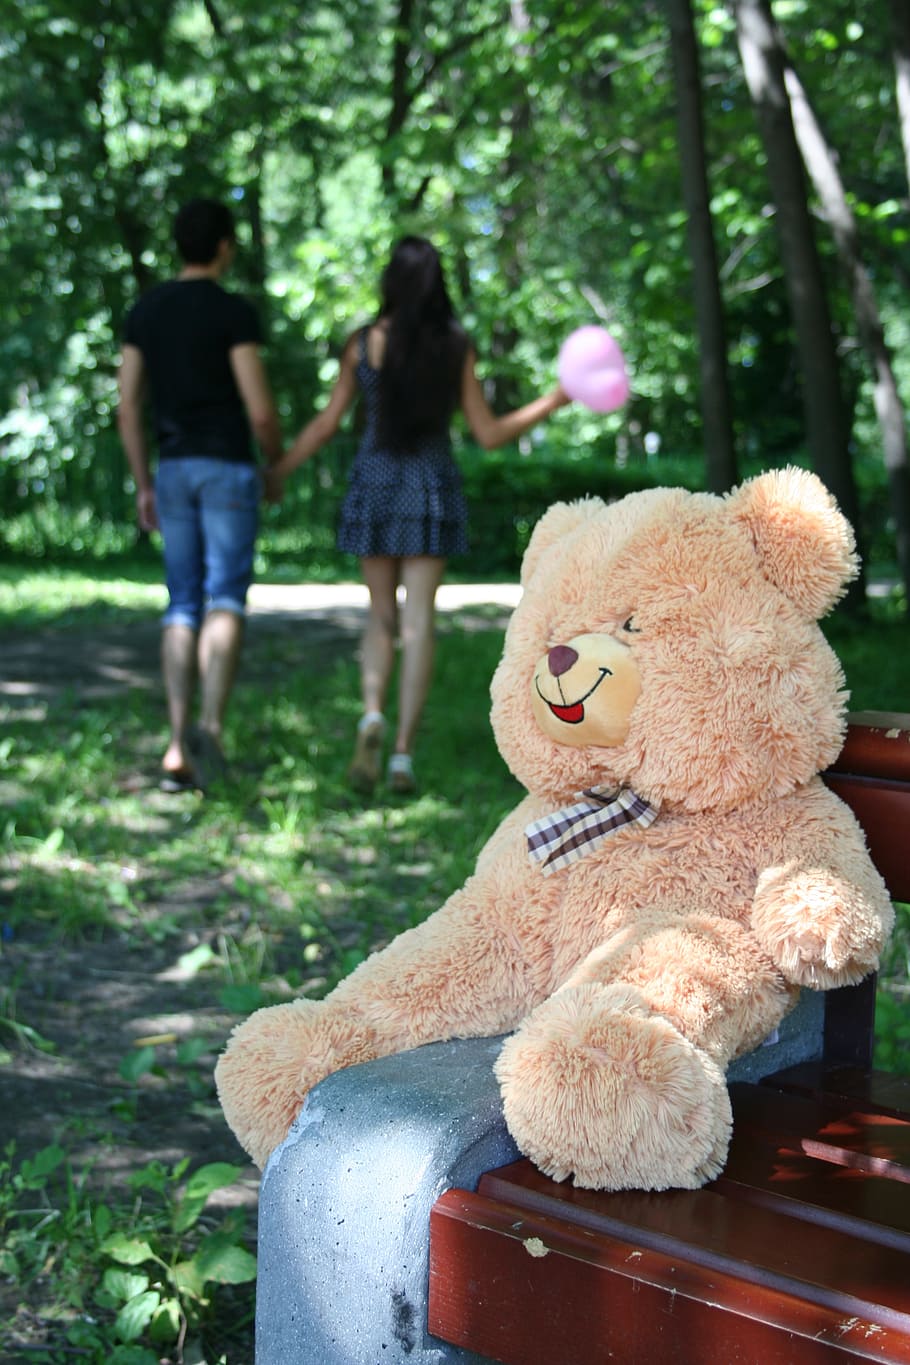 childhood goes away, maturation, teens, toy, stuffed toy, teddy bear, representation, focus on foreground, women, day